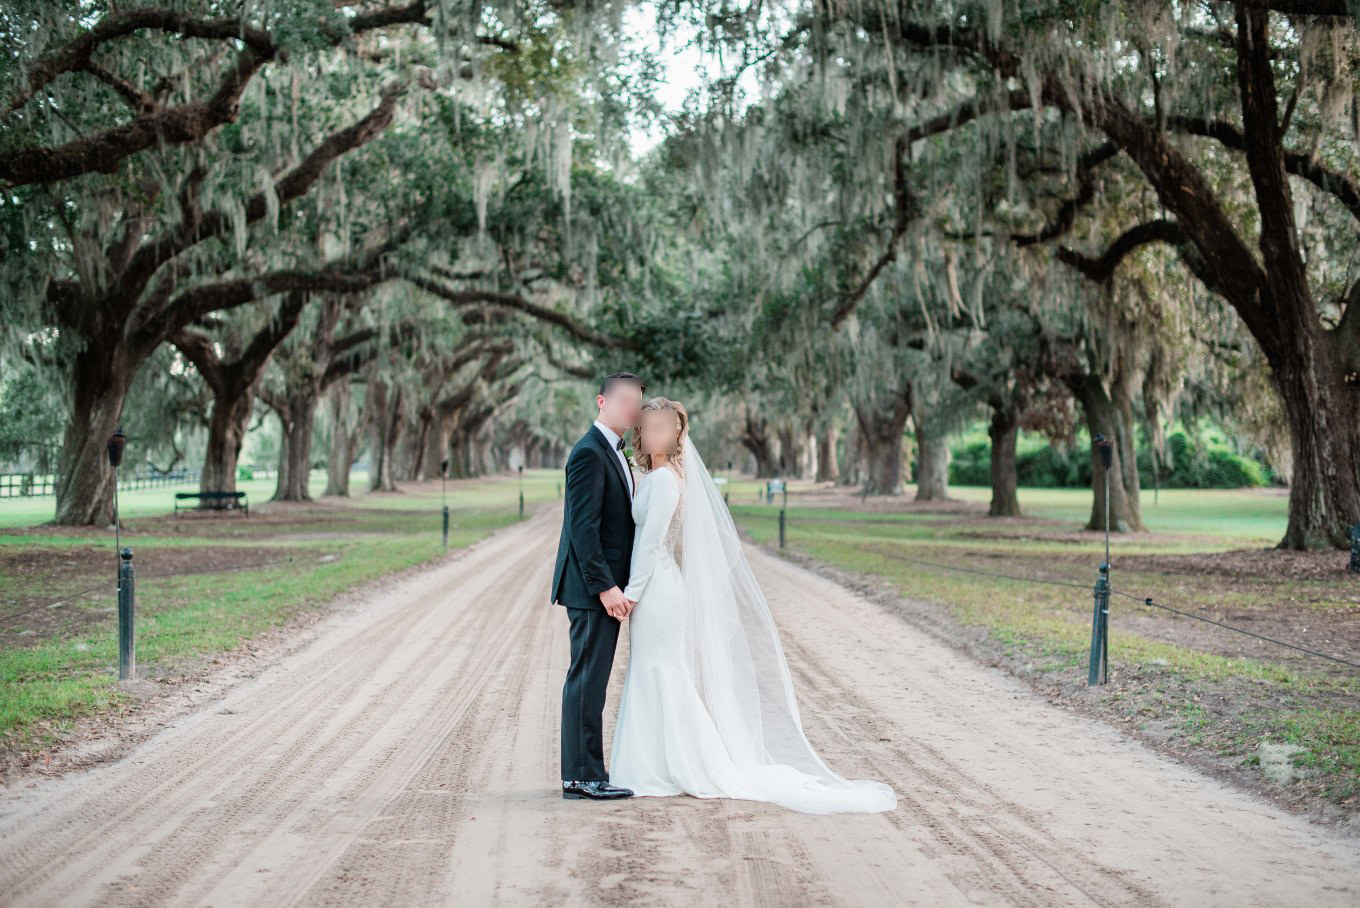 Brides And Grooms Who Got Married At Slave Plantations Speak Out About Criticism Of Weddings There